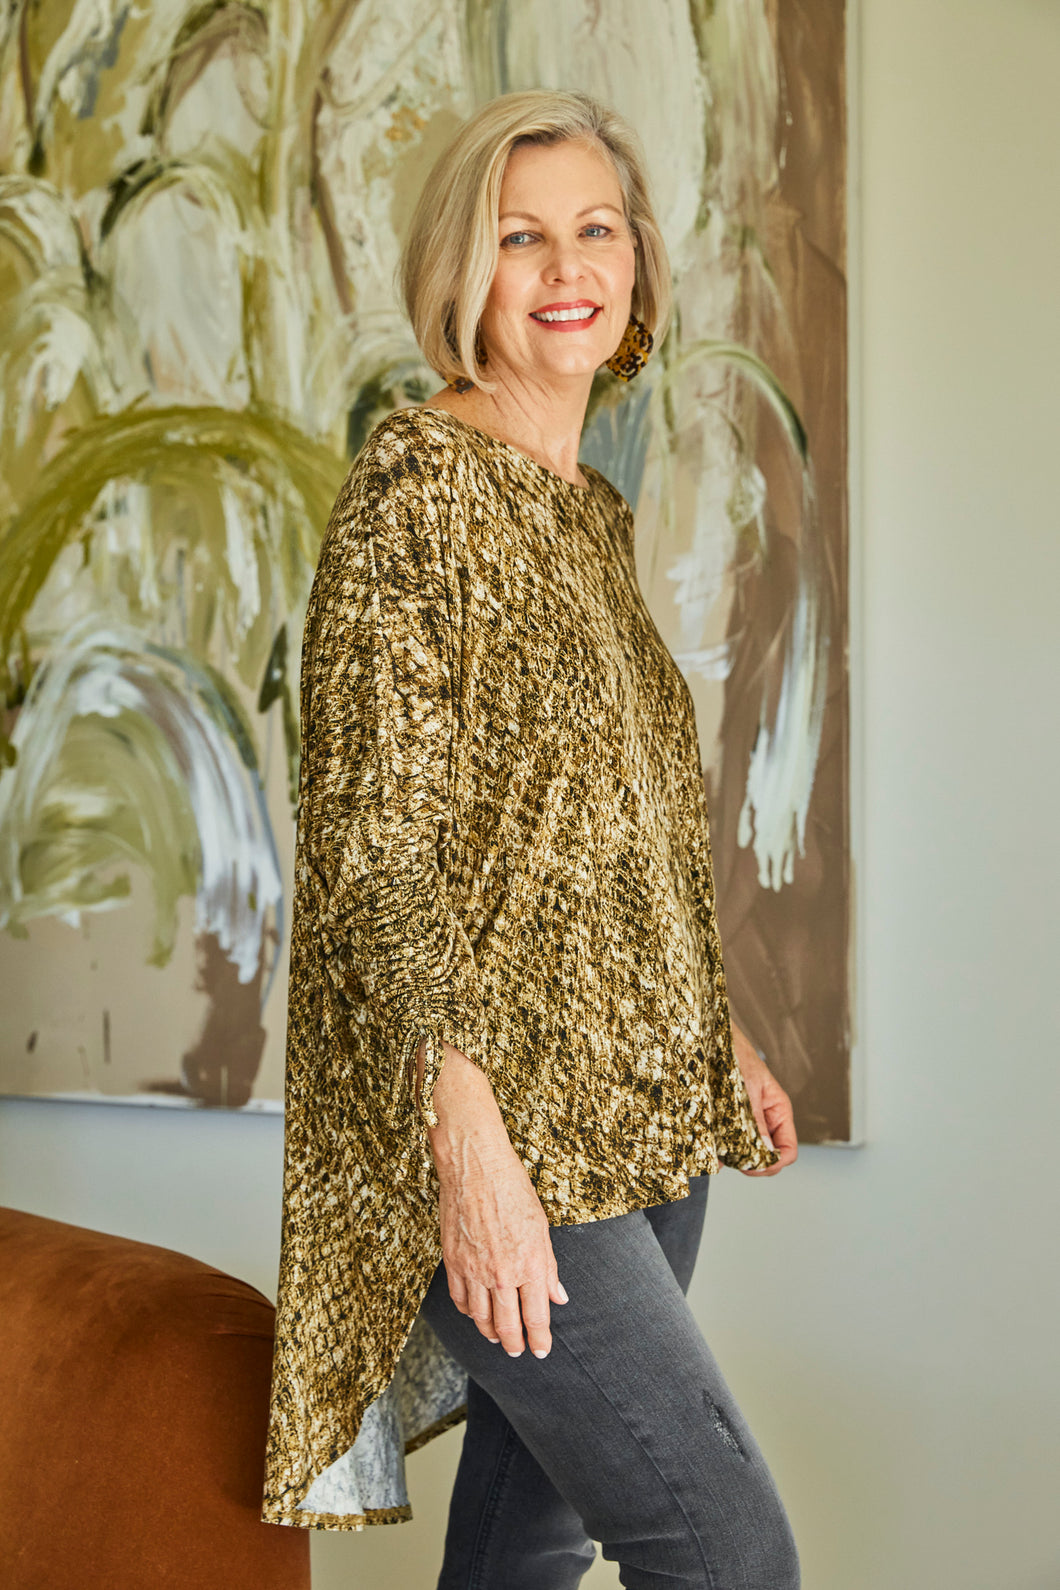 El Questro Ruched Top, Boa, Mud, Port, round neck, long scoop at back, ruched sleeve,  rayon spandex mix, leopard print, eb&ive, winter 2022, autumn 2022, small business, online, one size